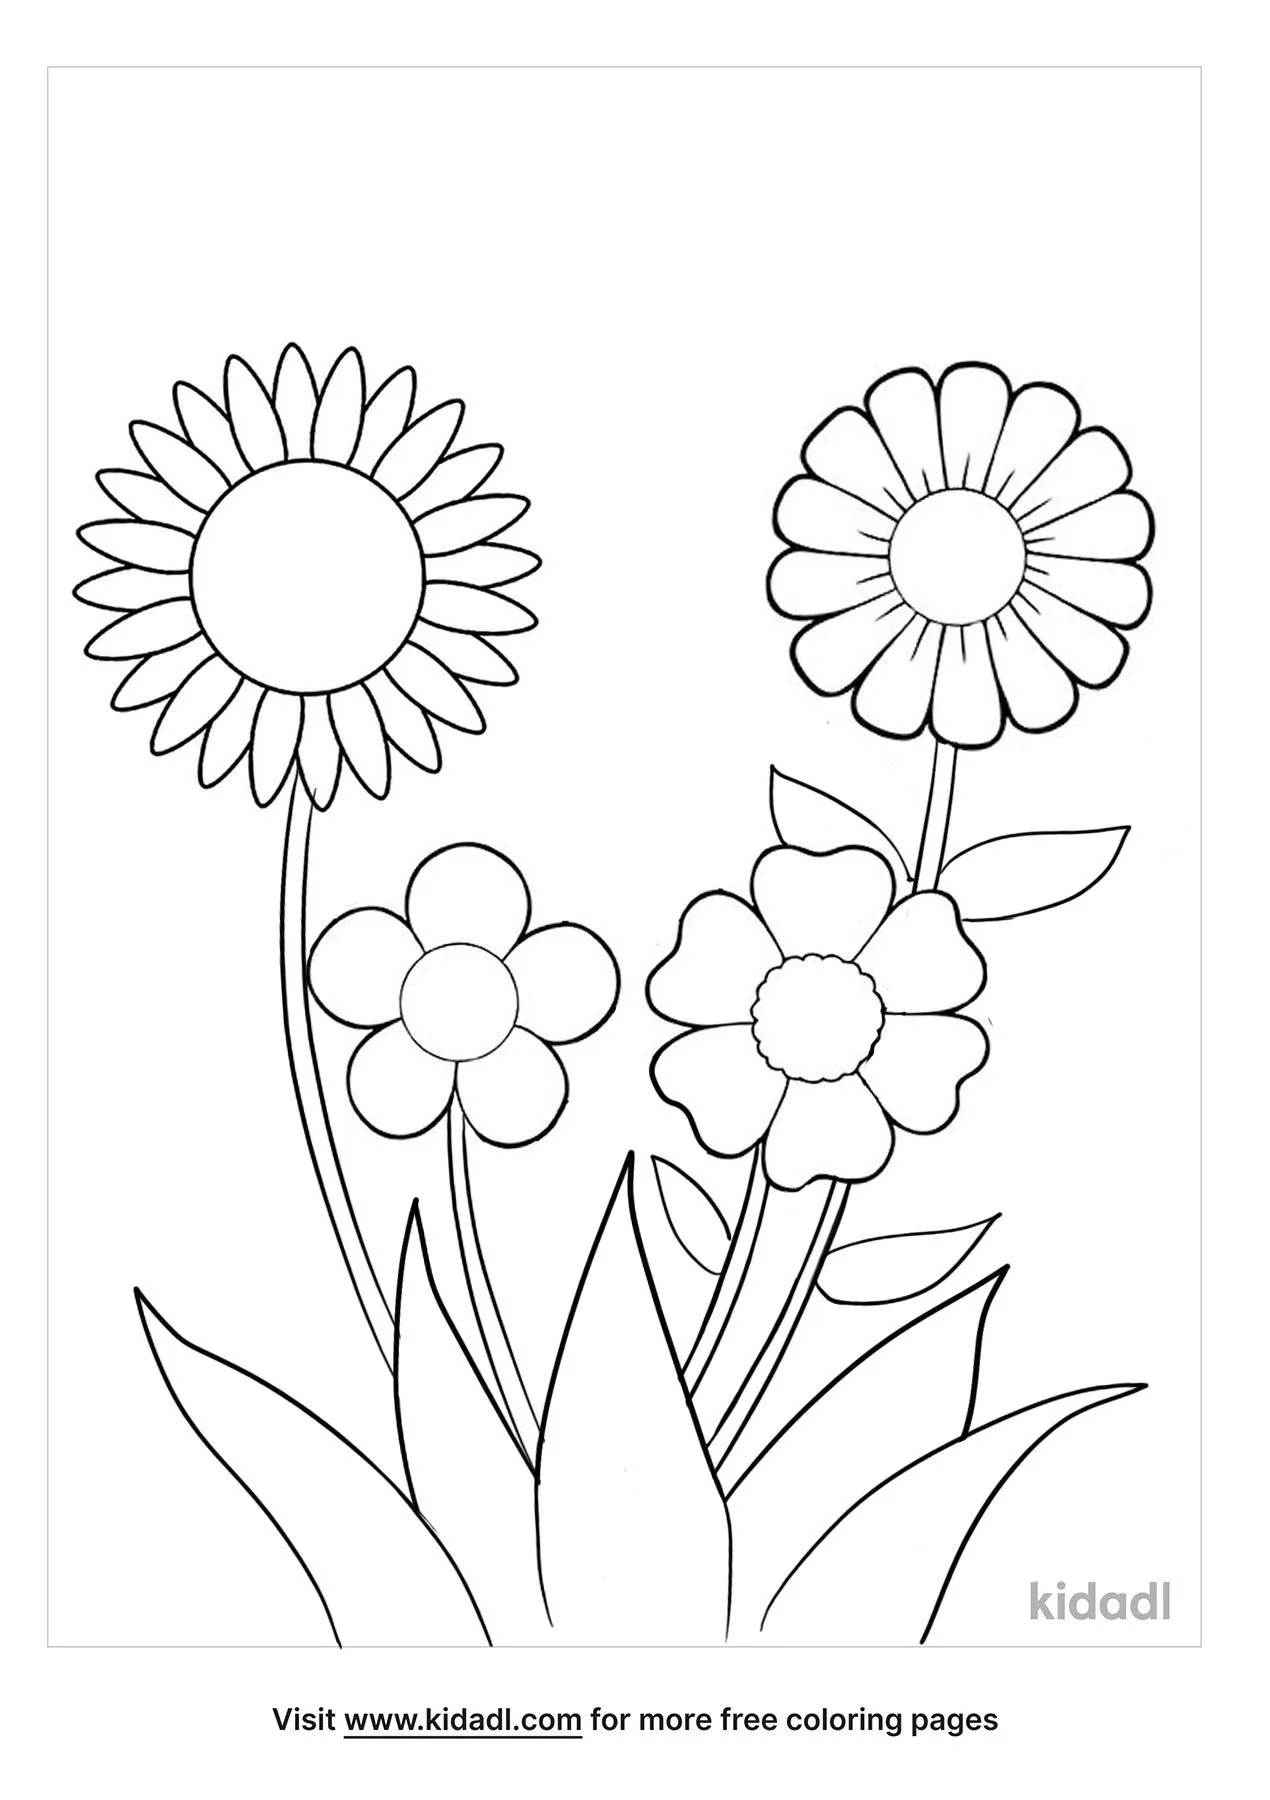 Summer Flowers Coloring Page | Free Flowers Coloring Page | Kidadl